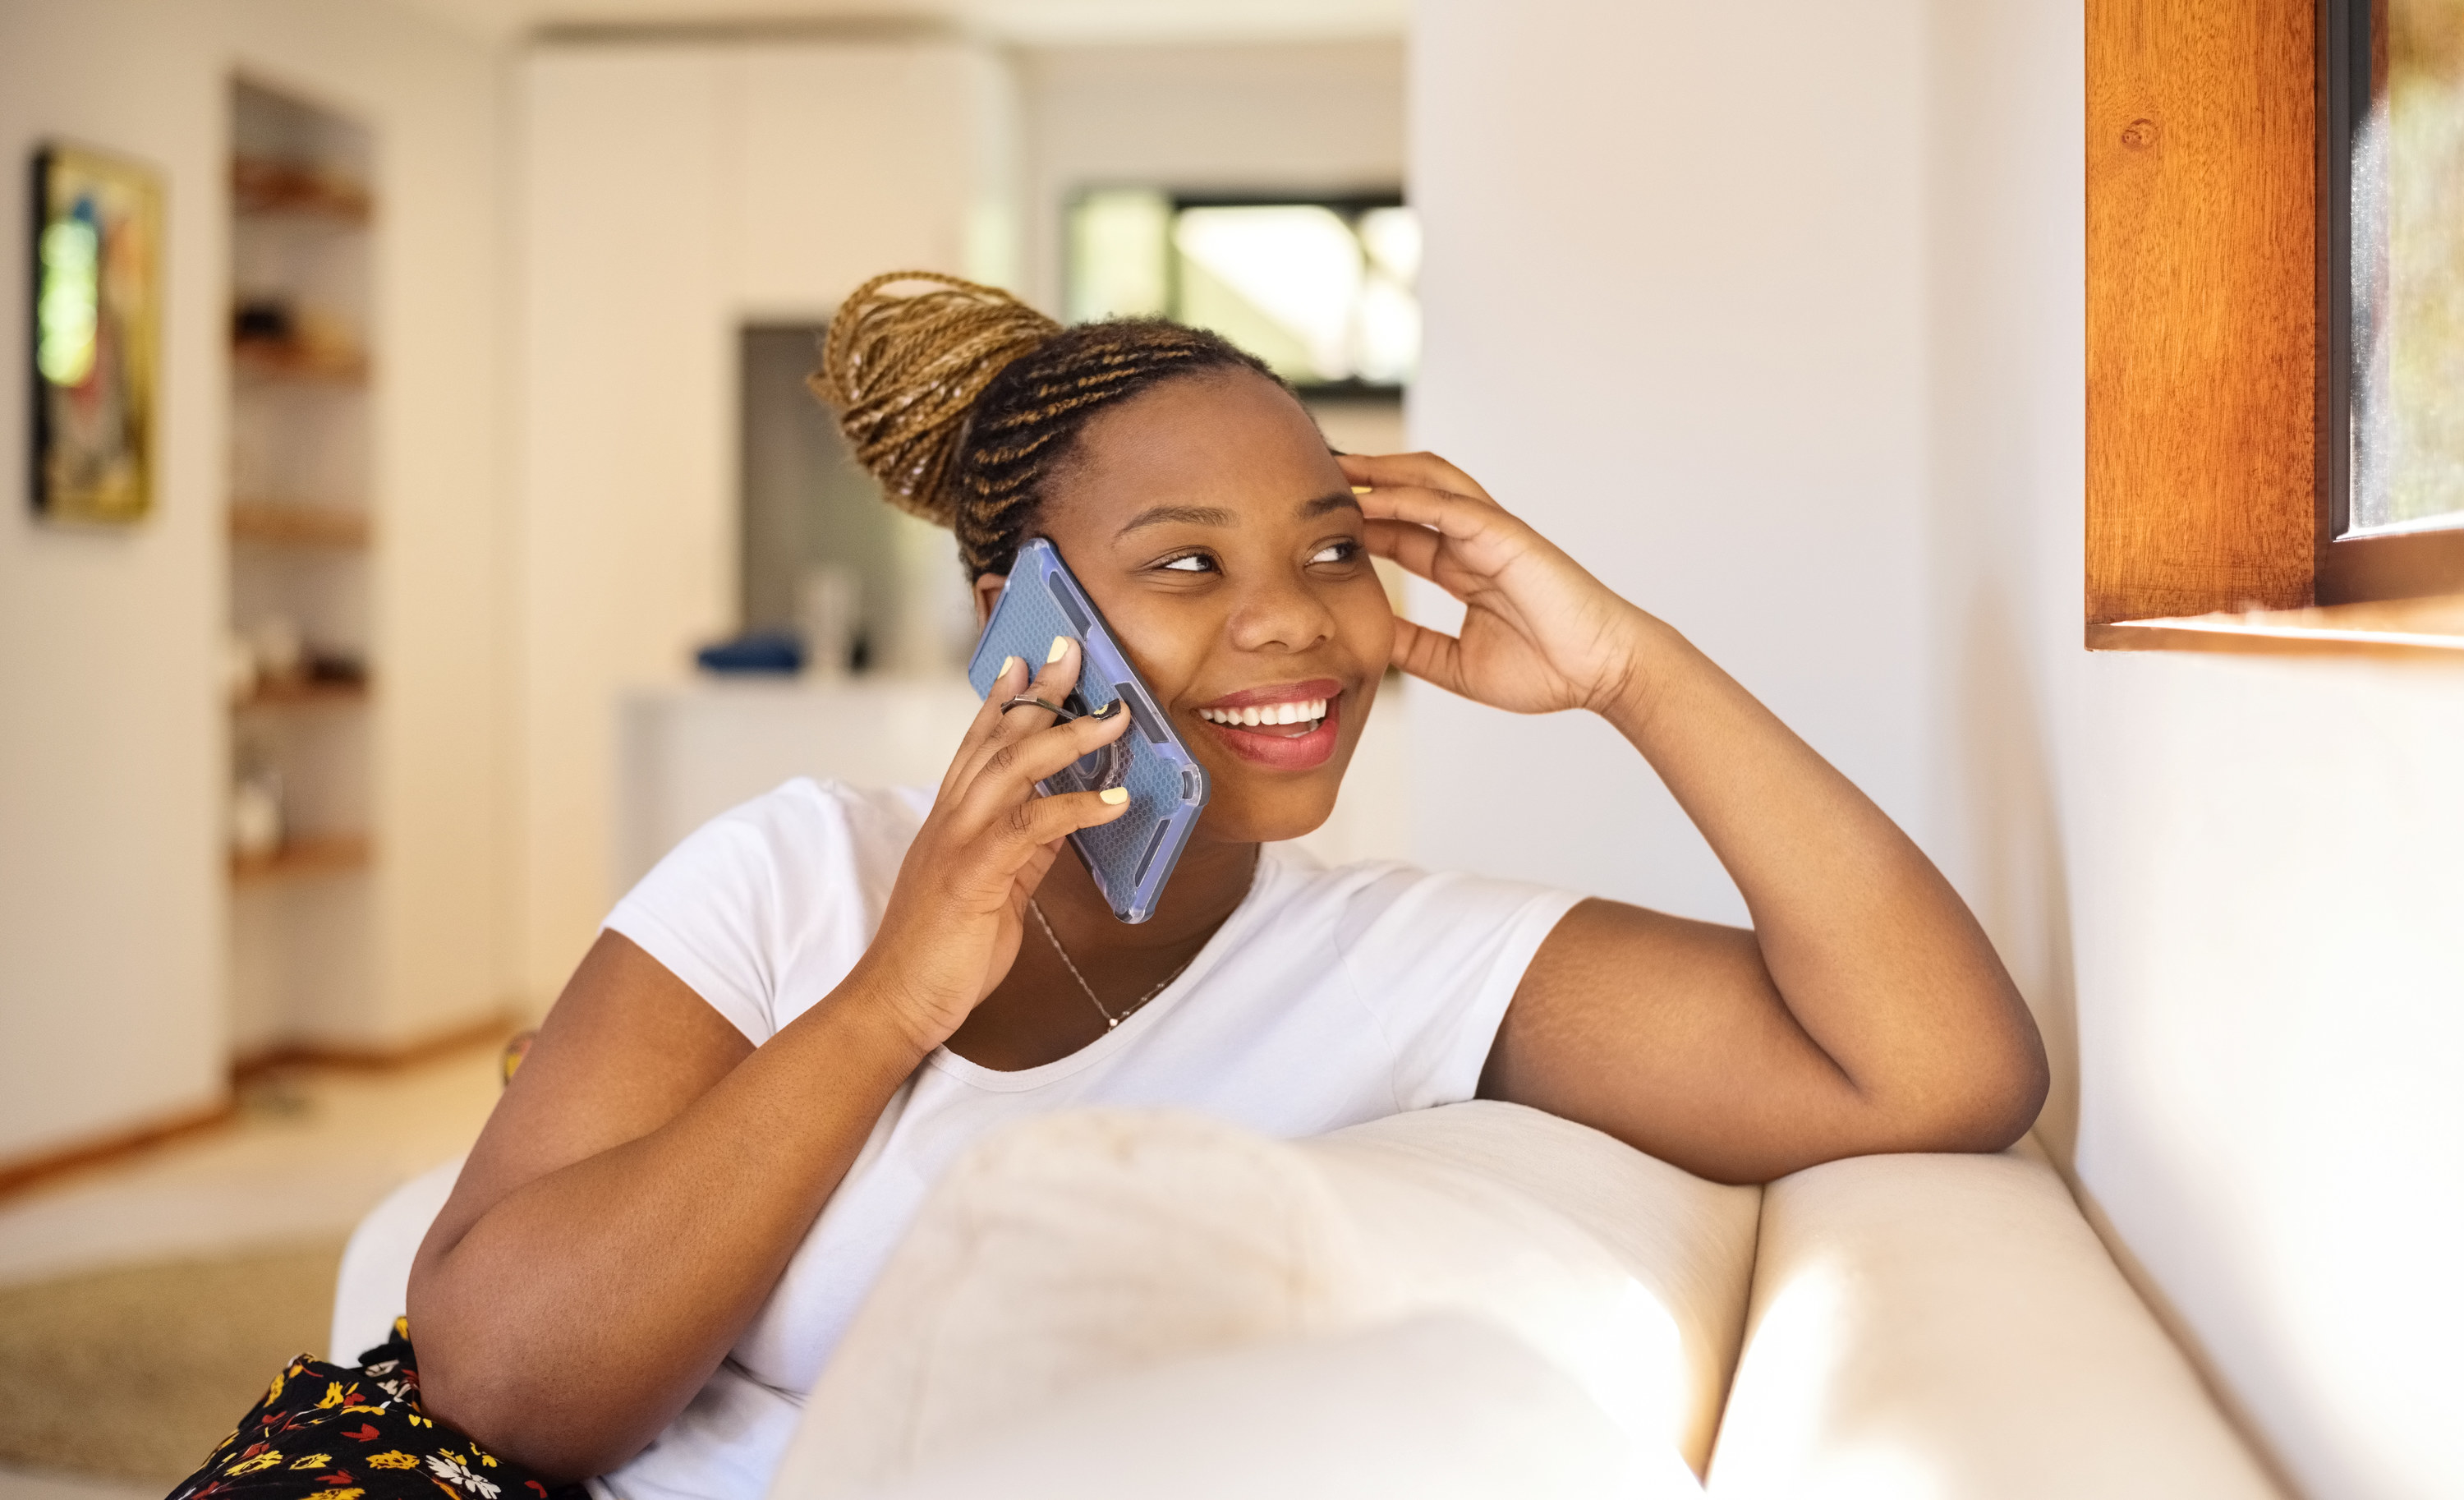 A woman relaxes on the couch while smiling and talking on the phone